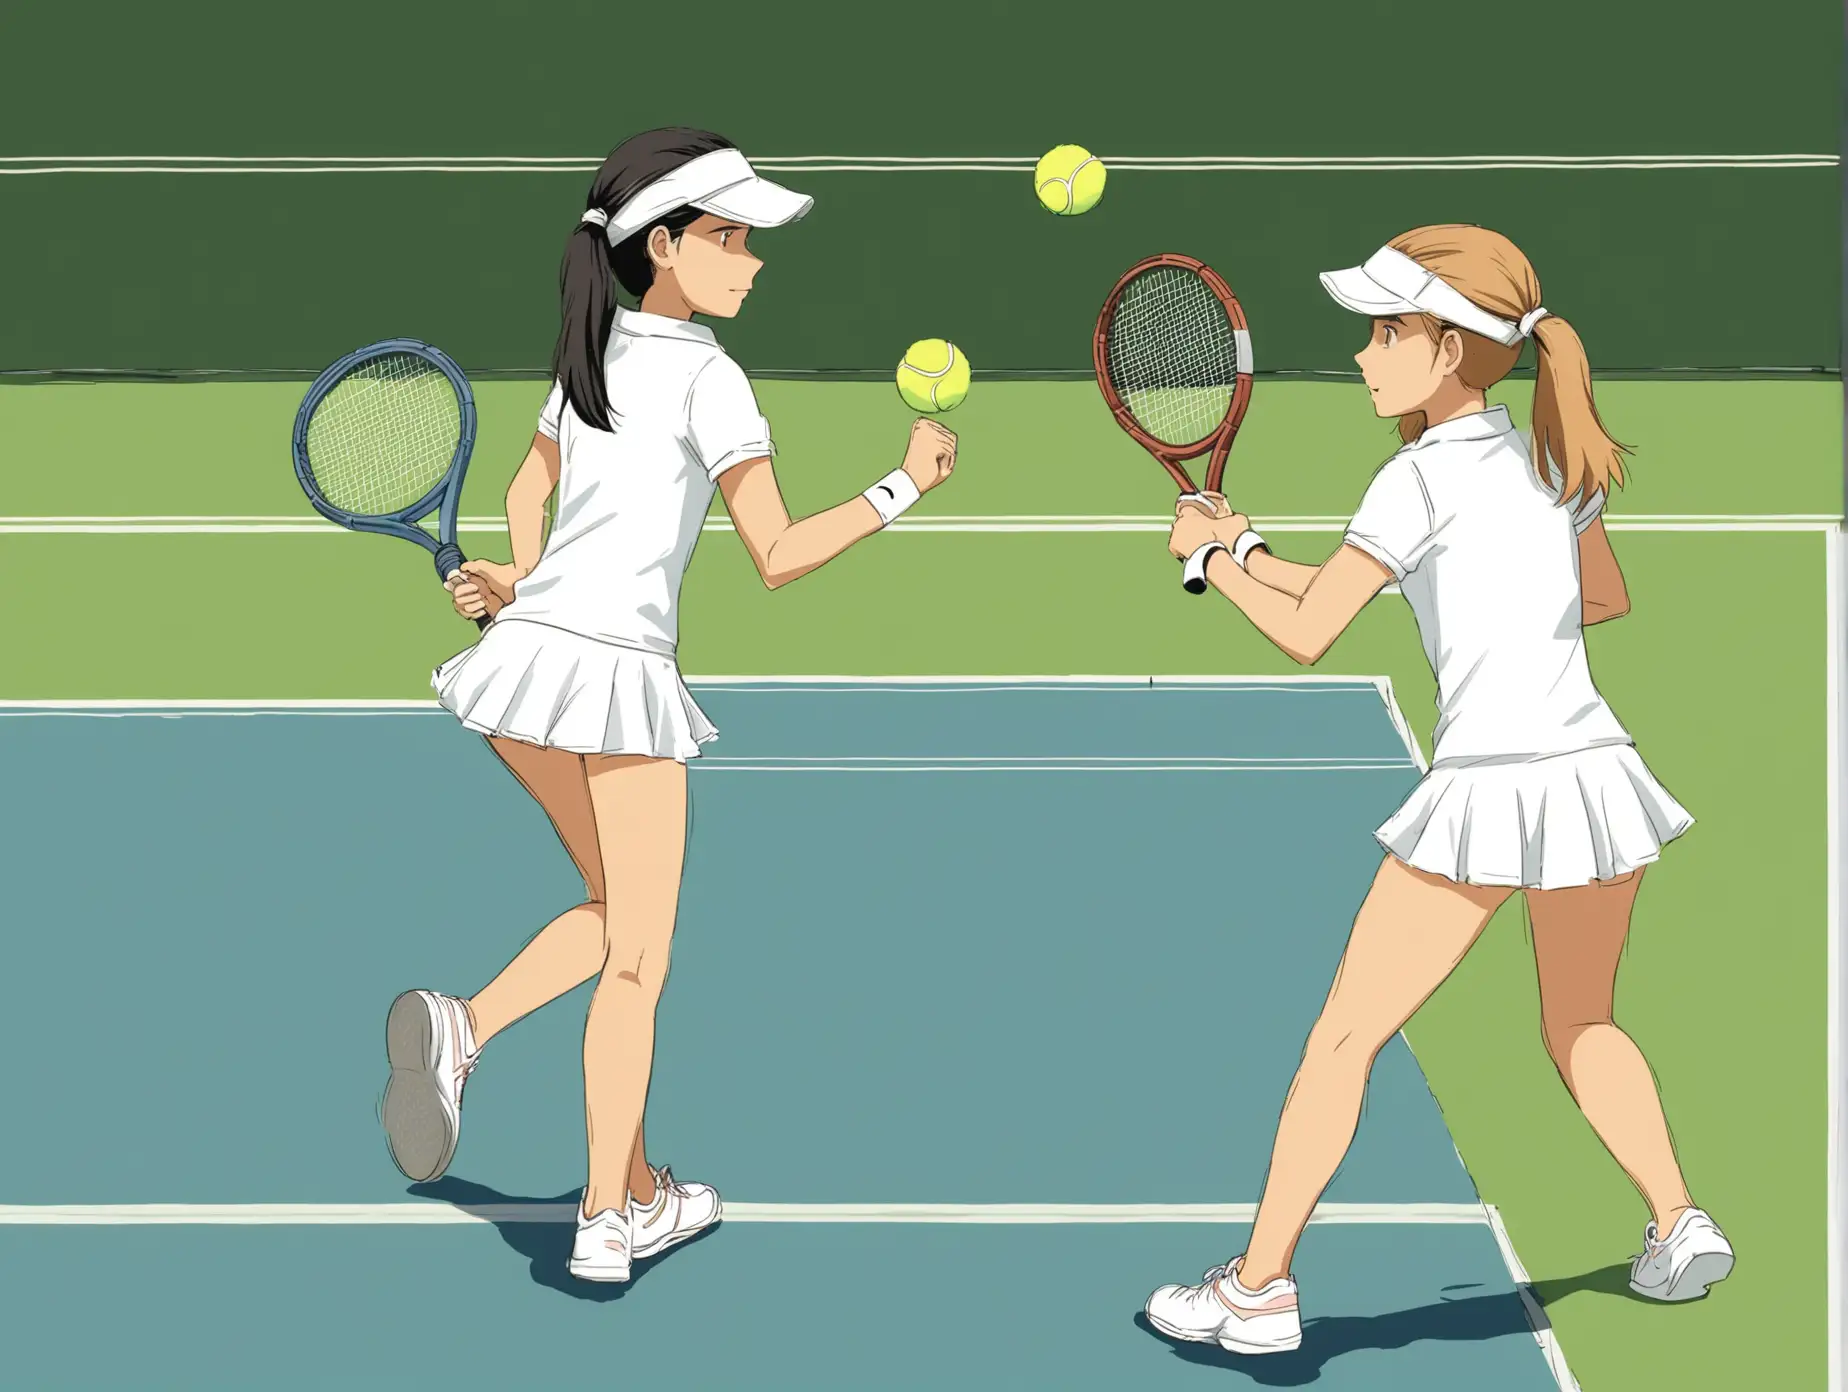 Two Girls Playing Tennis Match in Competitive Sport Scene